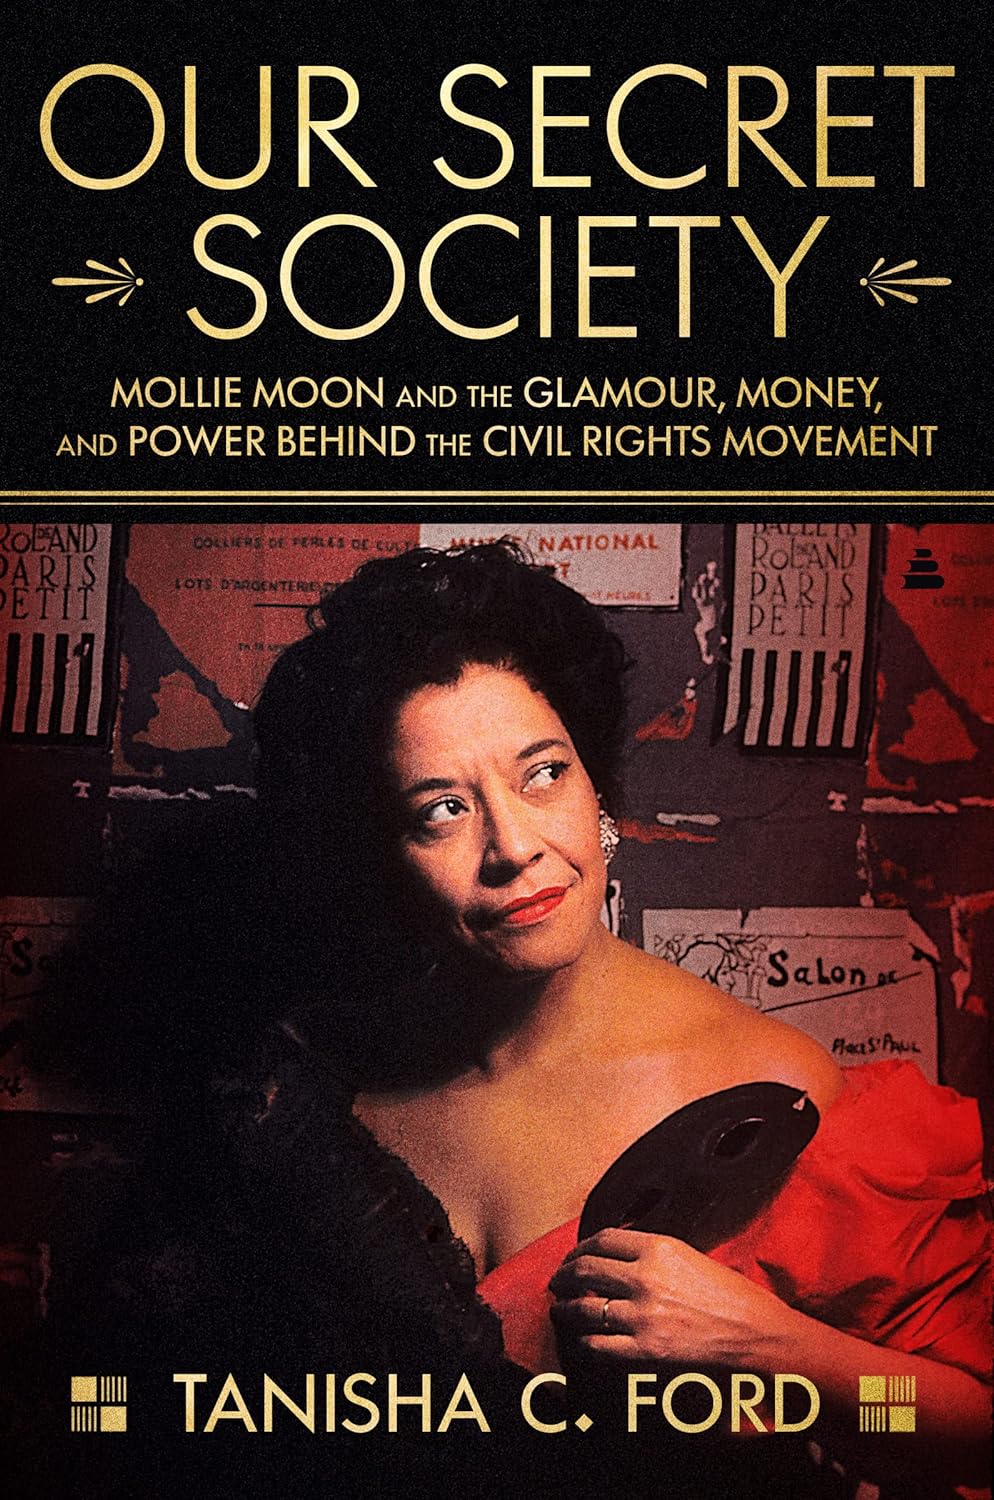 Our Secret Society // Mollie Moon and the Glamour, Money, and Power Behind the Civil Rights Movement